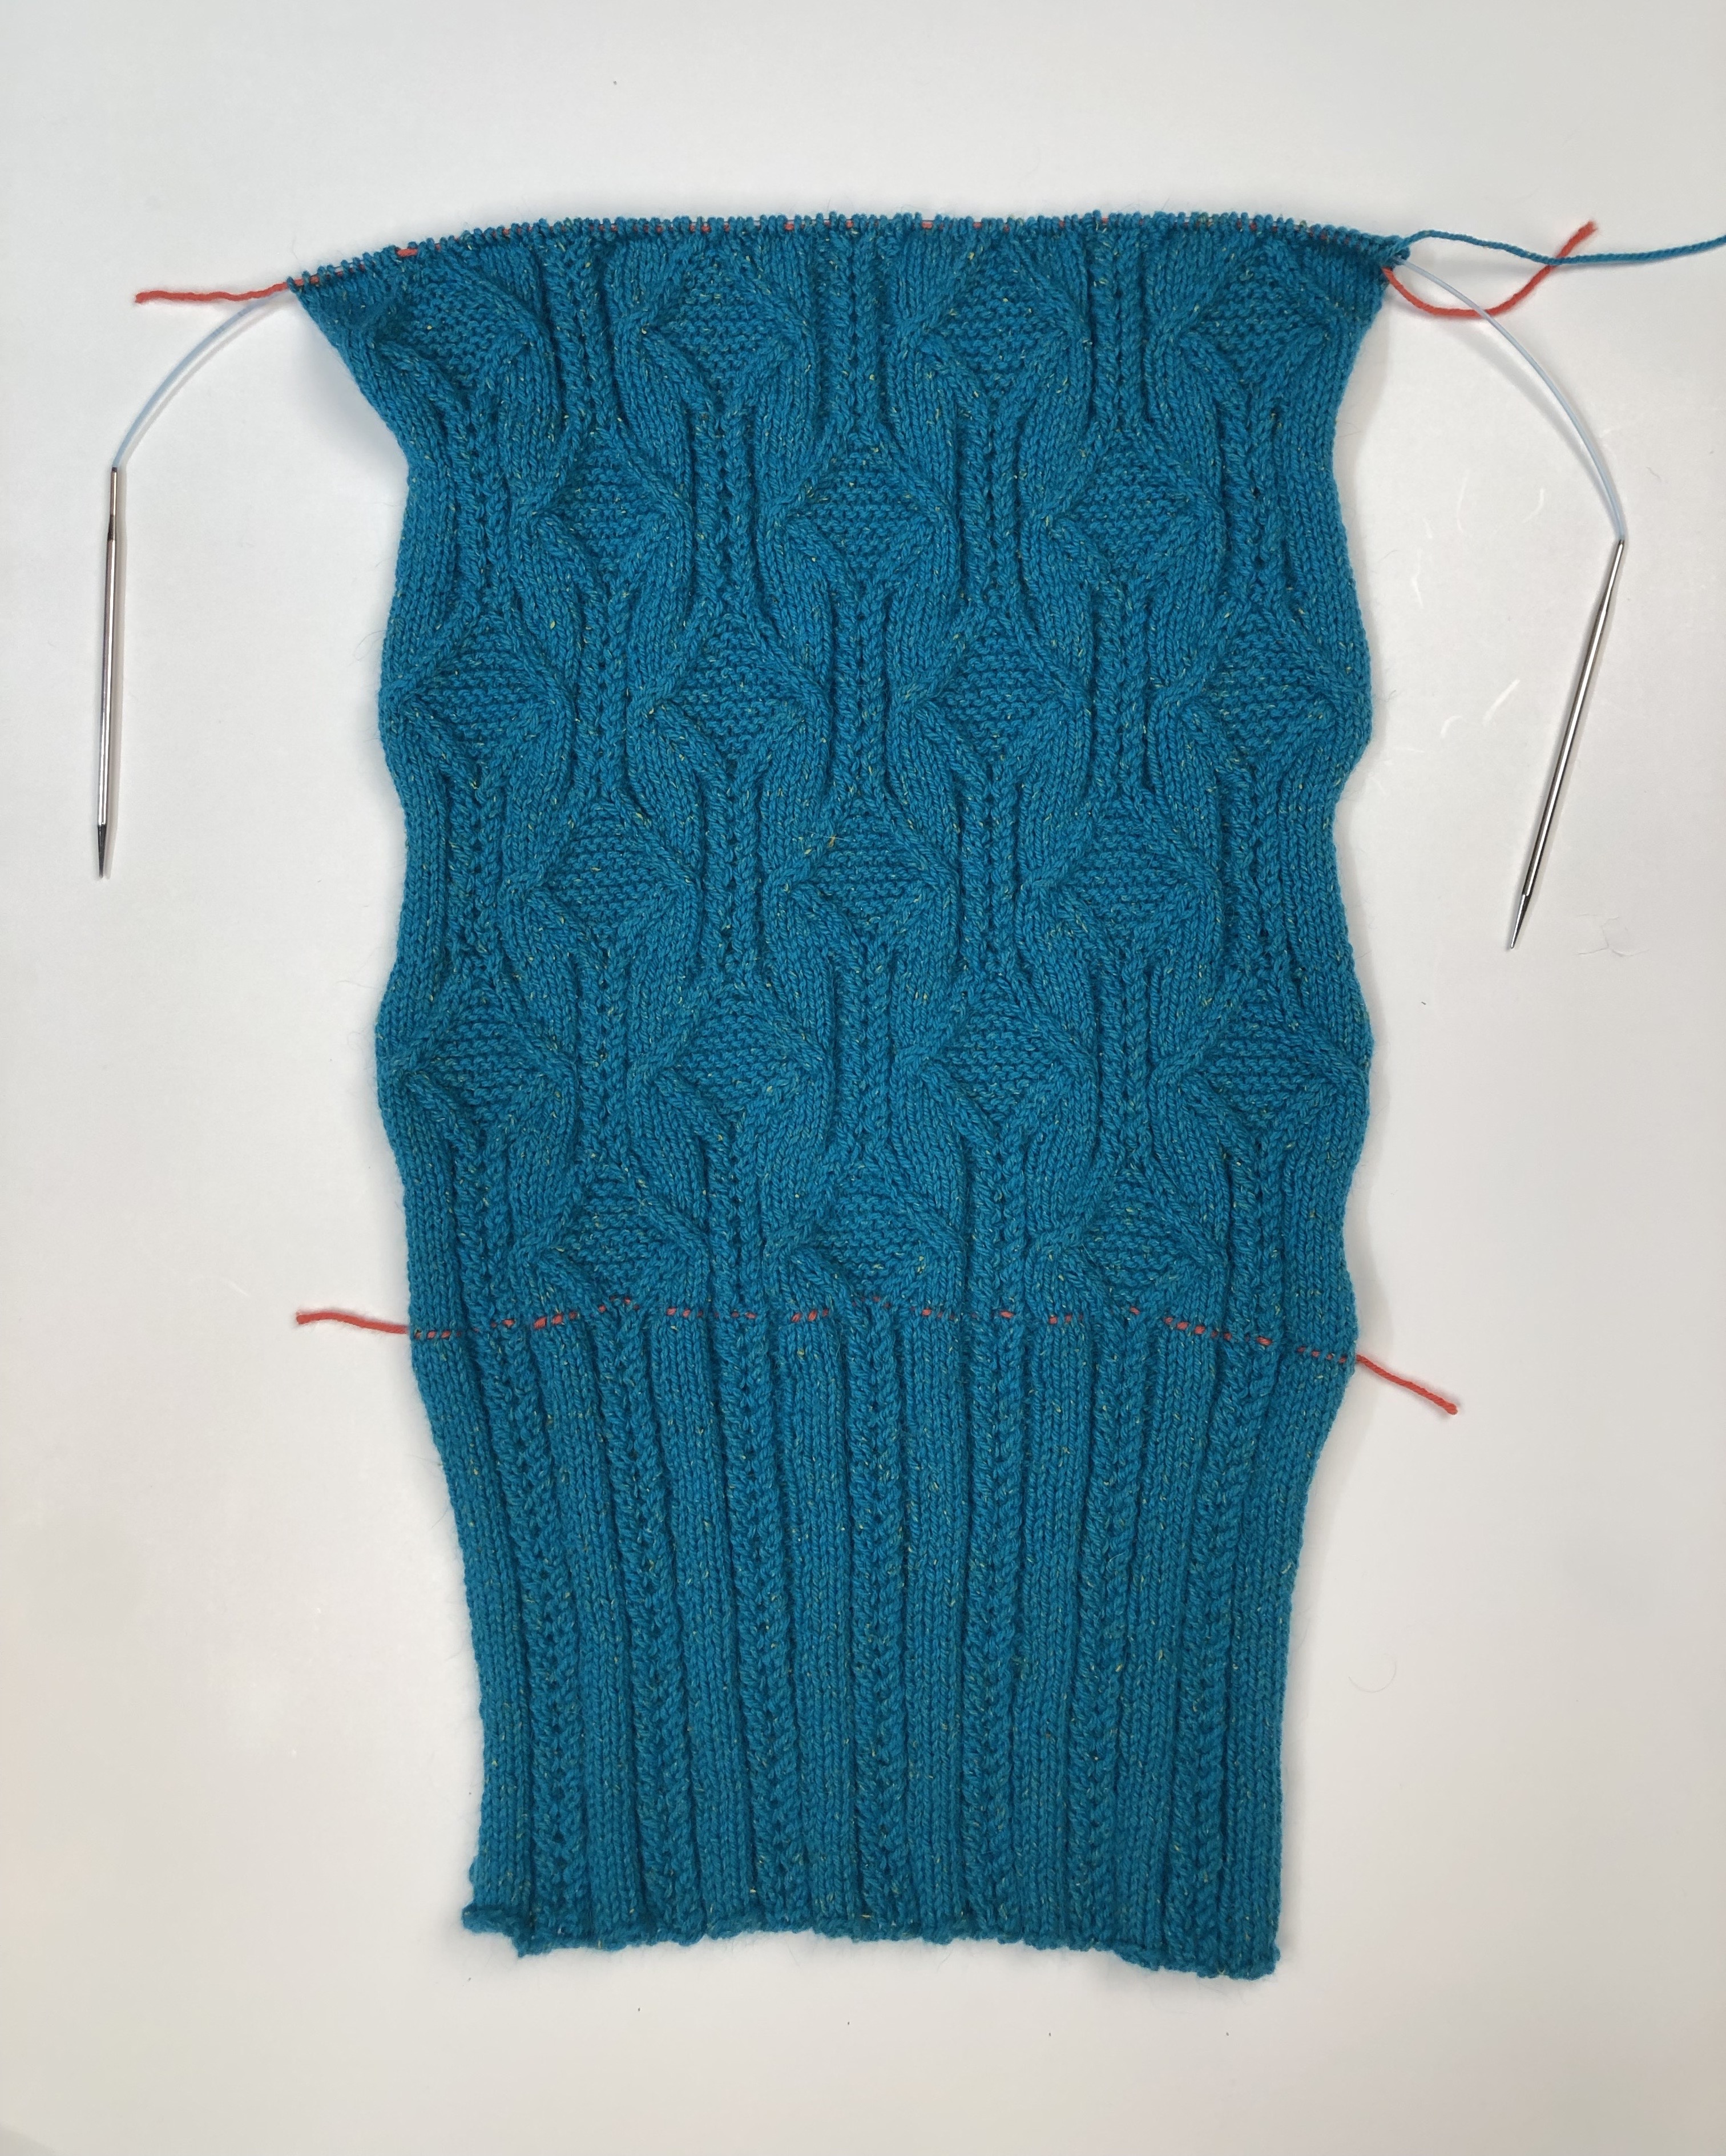 Cable 4 Front (C4F) without a Cable Needle (No CN) - How to Knit